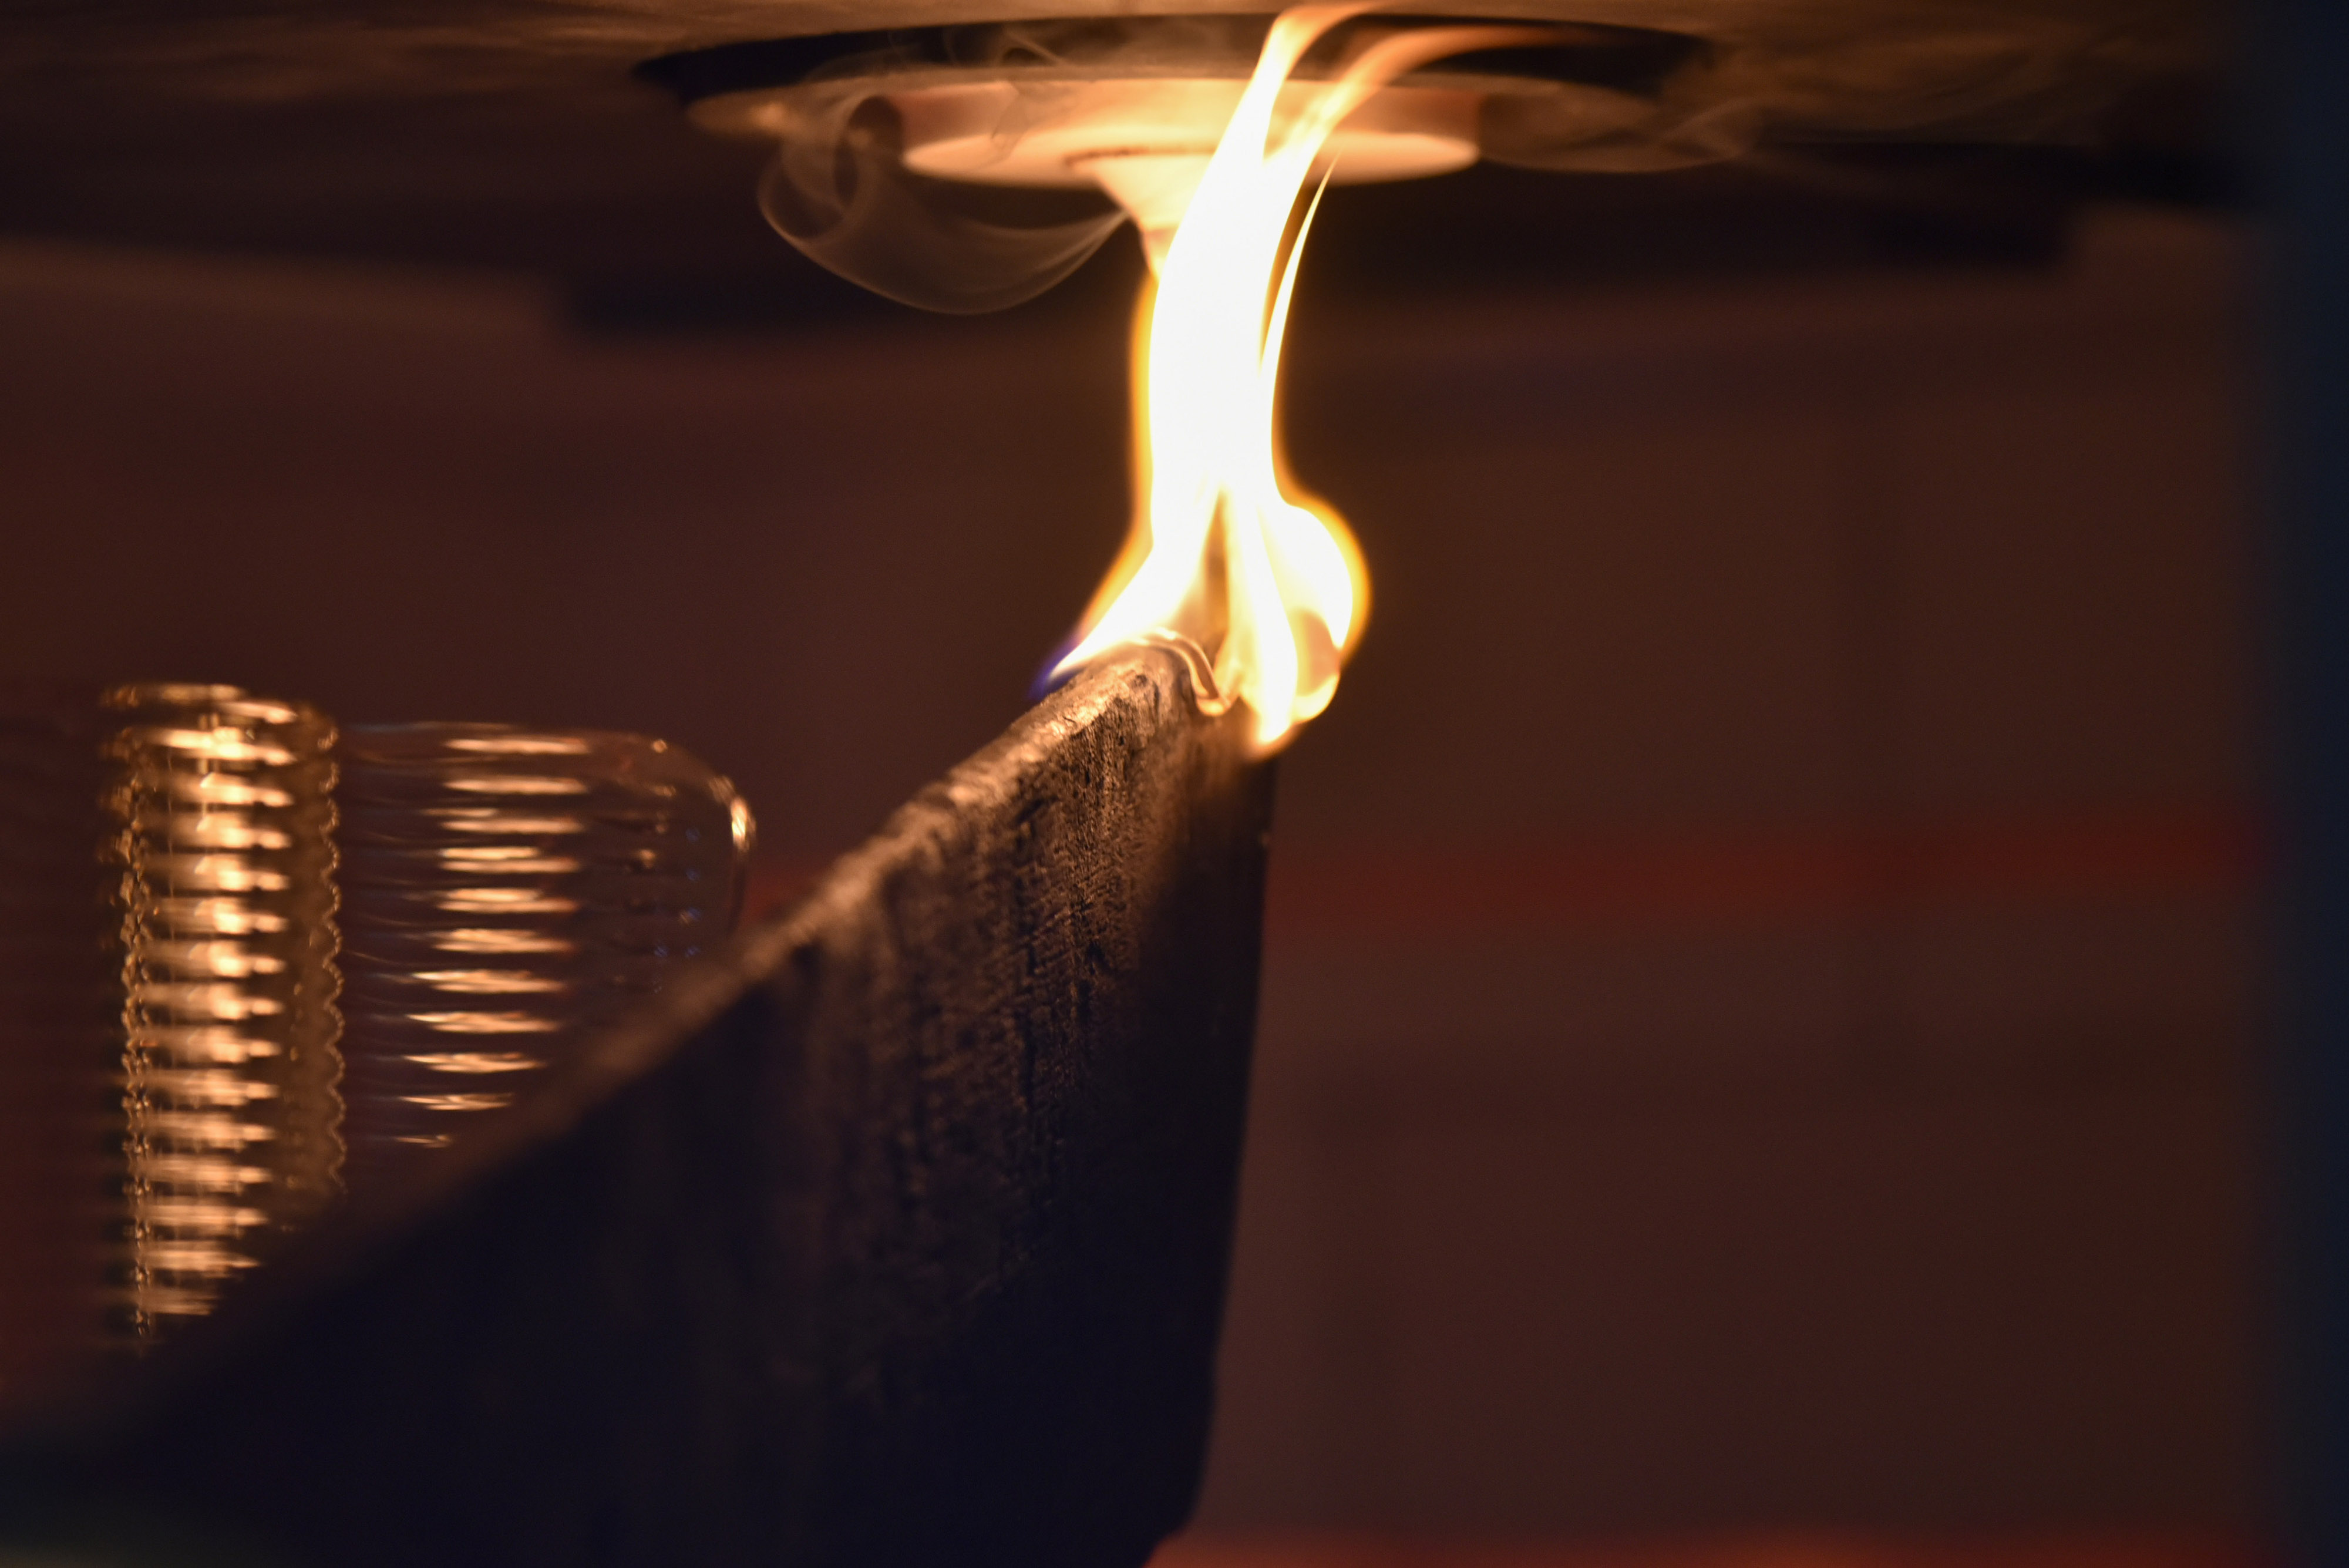 A detailed look inside a molten glass 3D printer, featuring flames and glass coils.